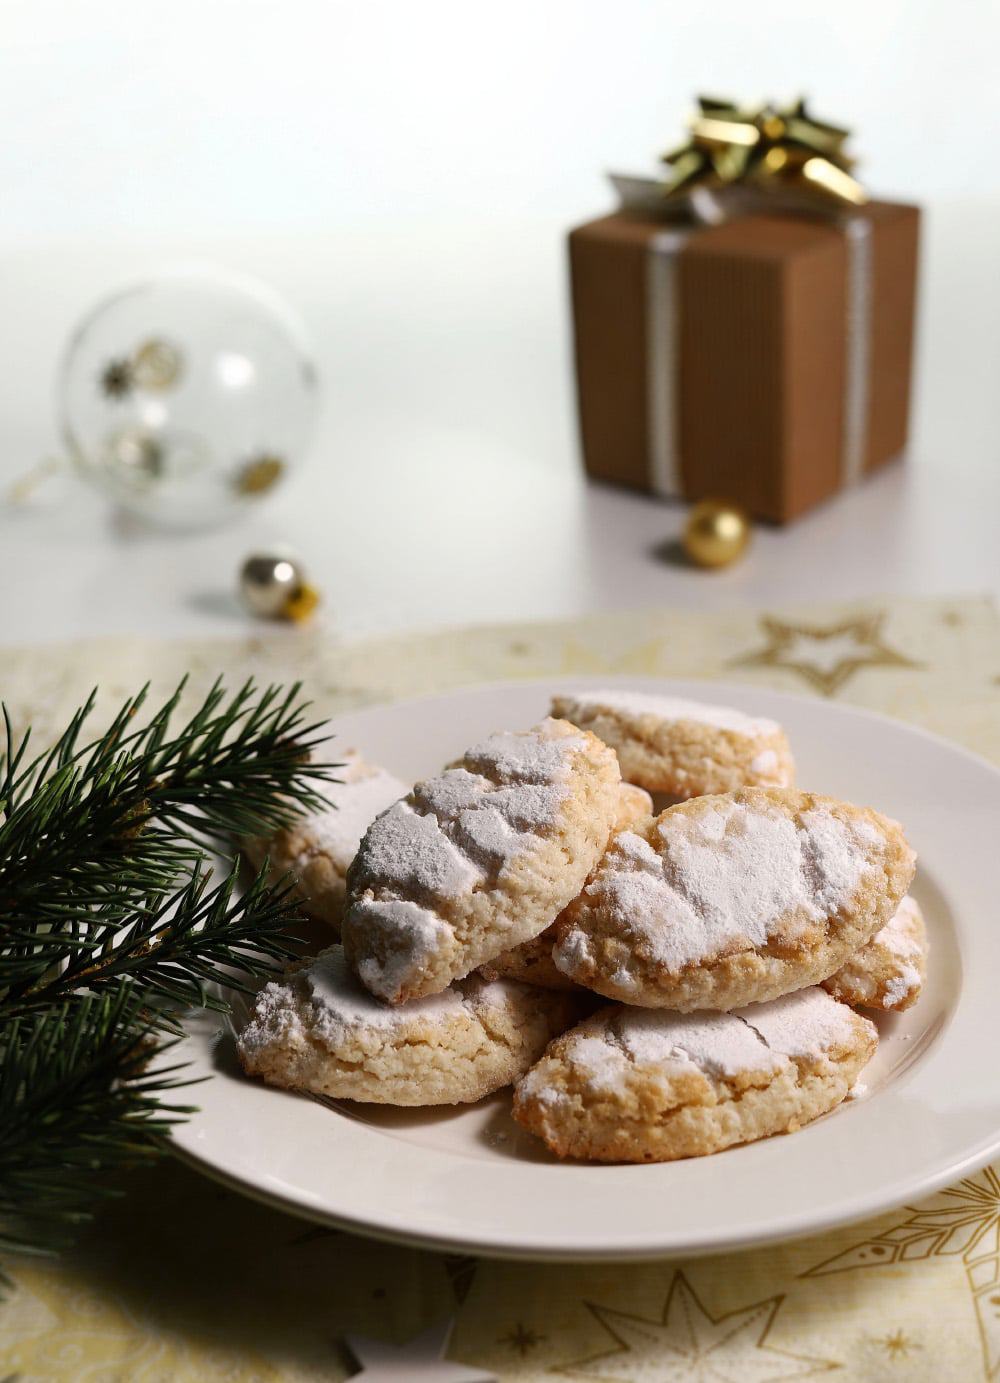 Amazingly Chewy Ricciarelli Almond Cookies | Cooking Clue